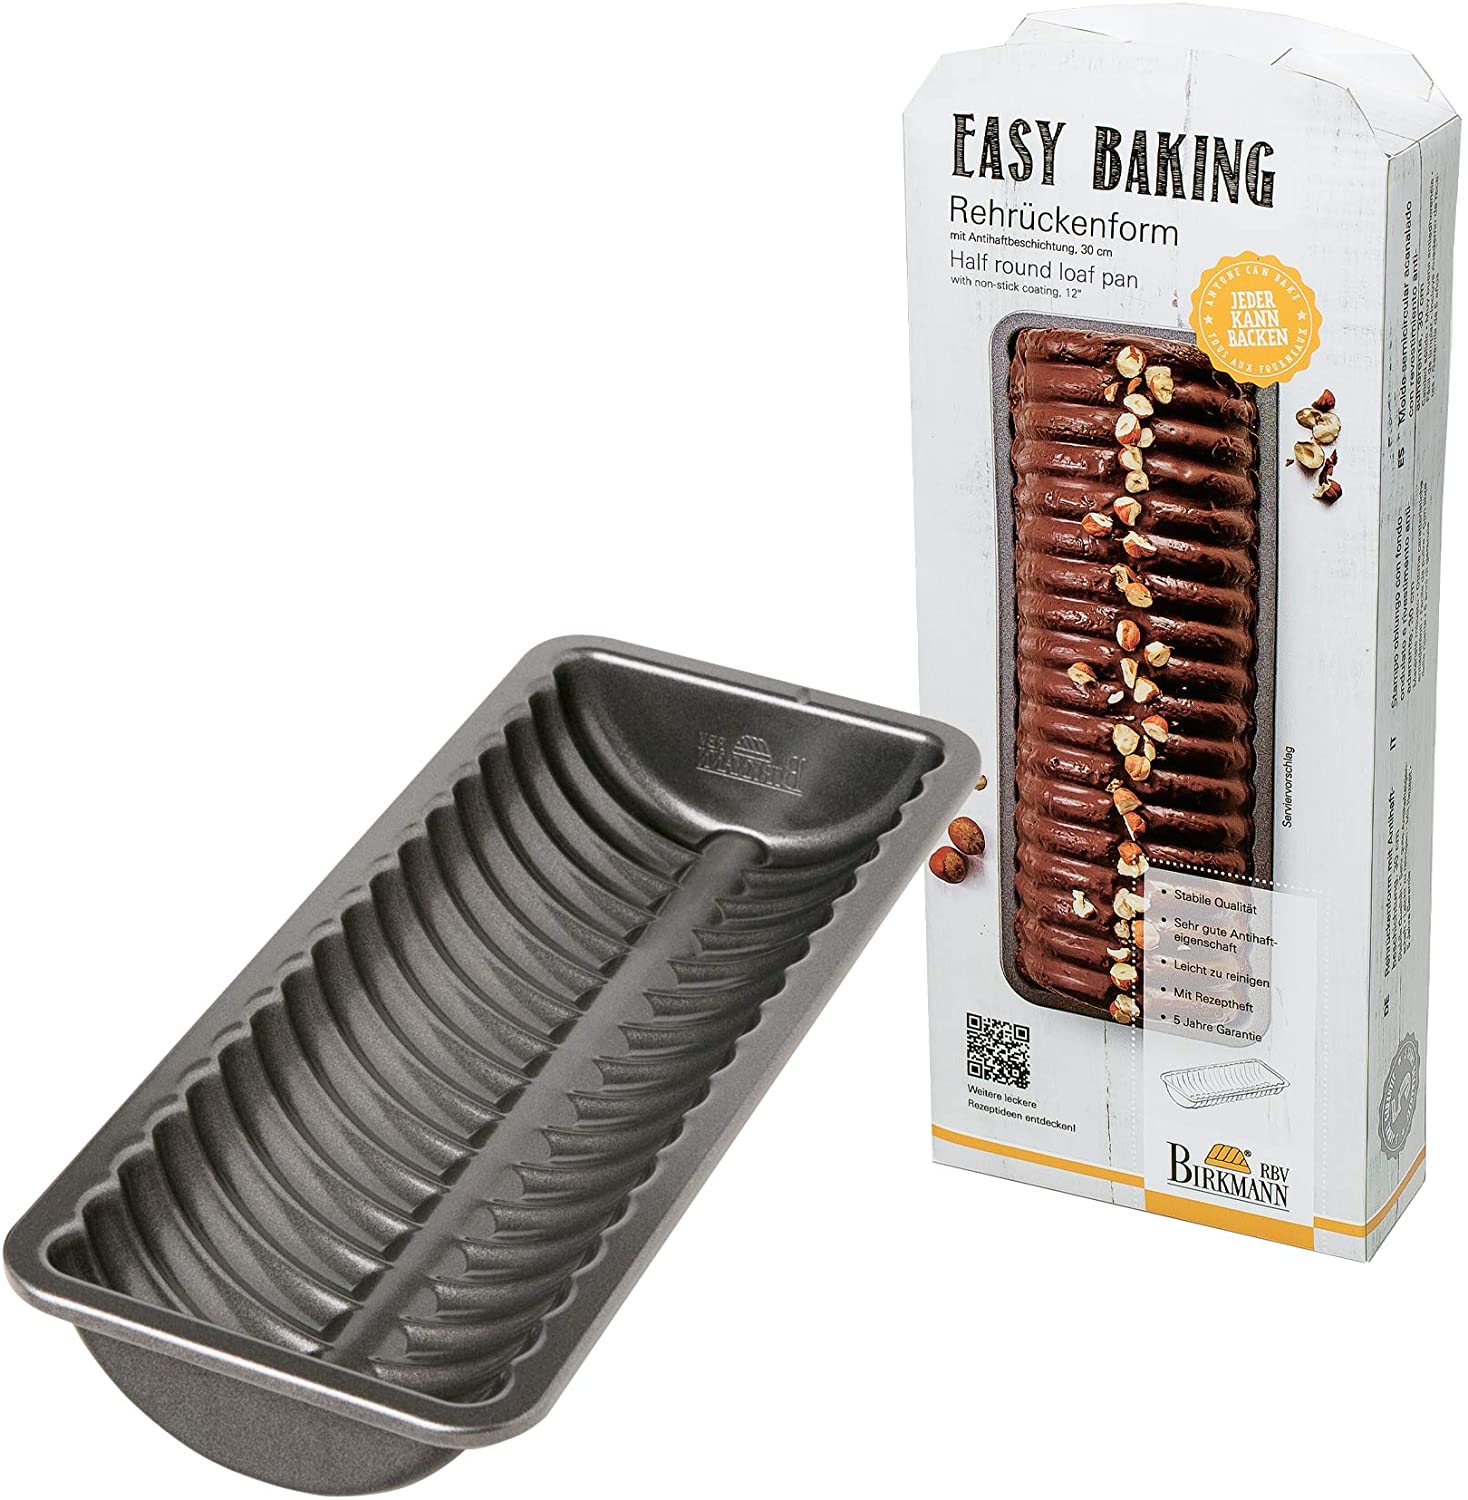 Baking Moulds from the Easy Baking Range by RBV Birkmann, grey, 4 x 4 x 5 cm